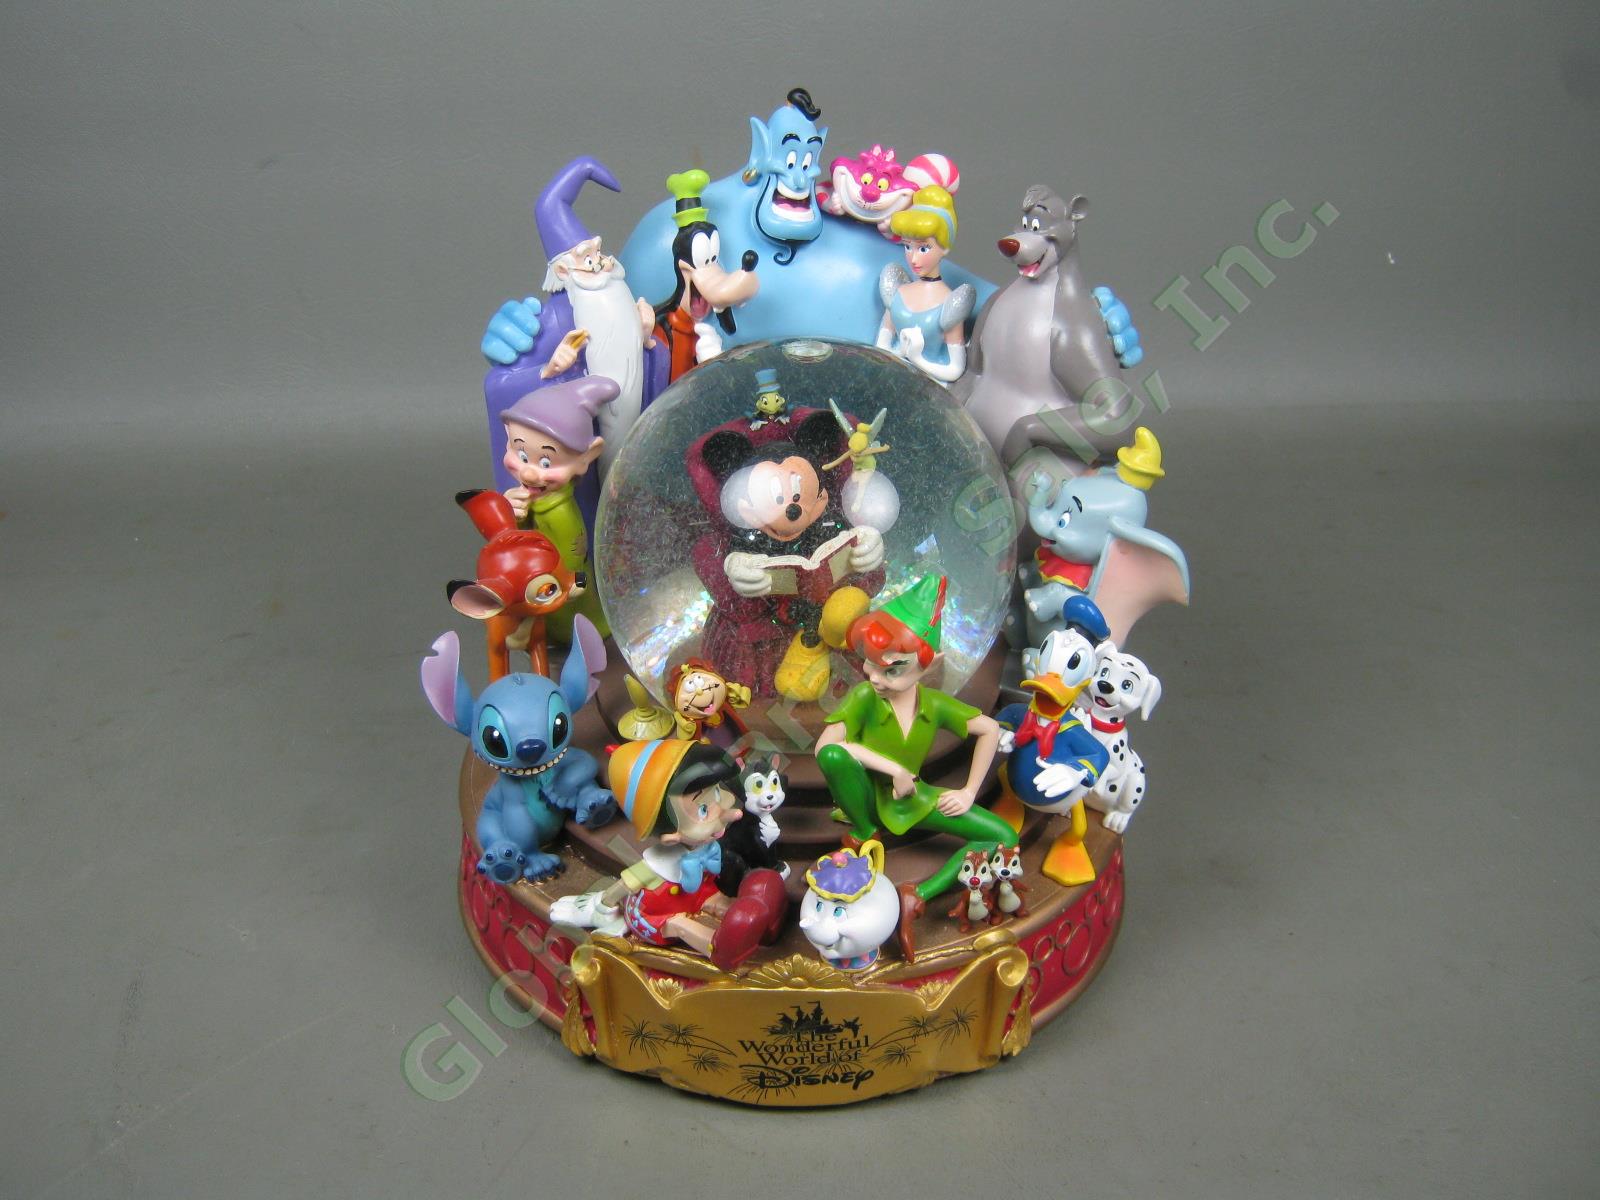 The Wonderful World Of Disney Store Musical Snow Globe When You Wish Upon A Star 1